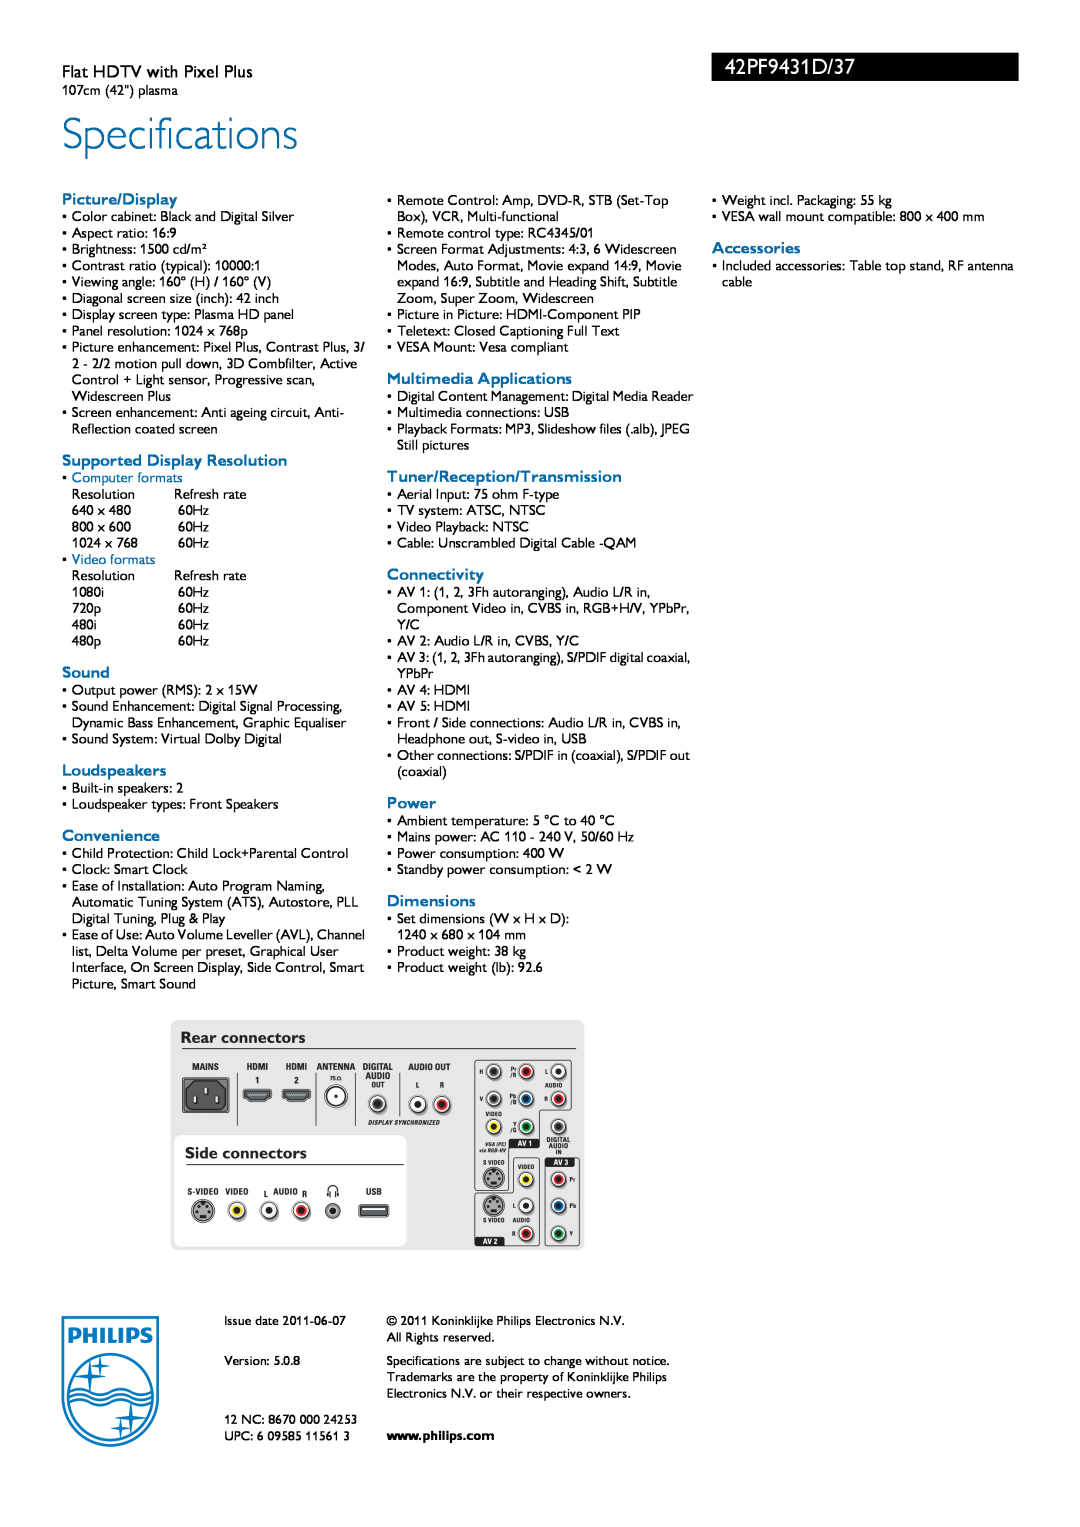 Philips manual Specifications, 42PF9431D/37, Flat HDTV with Pixel Plus 